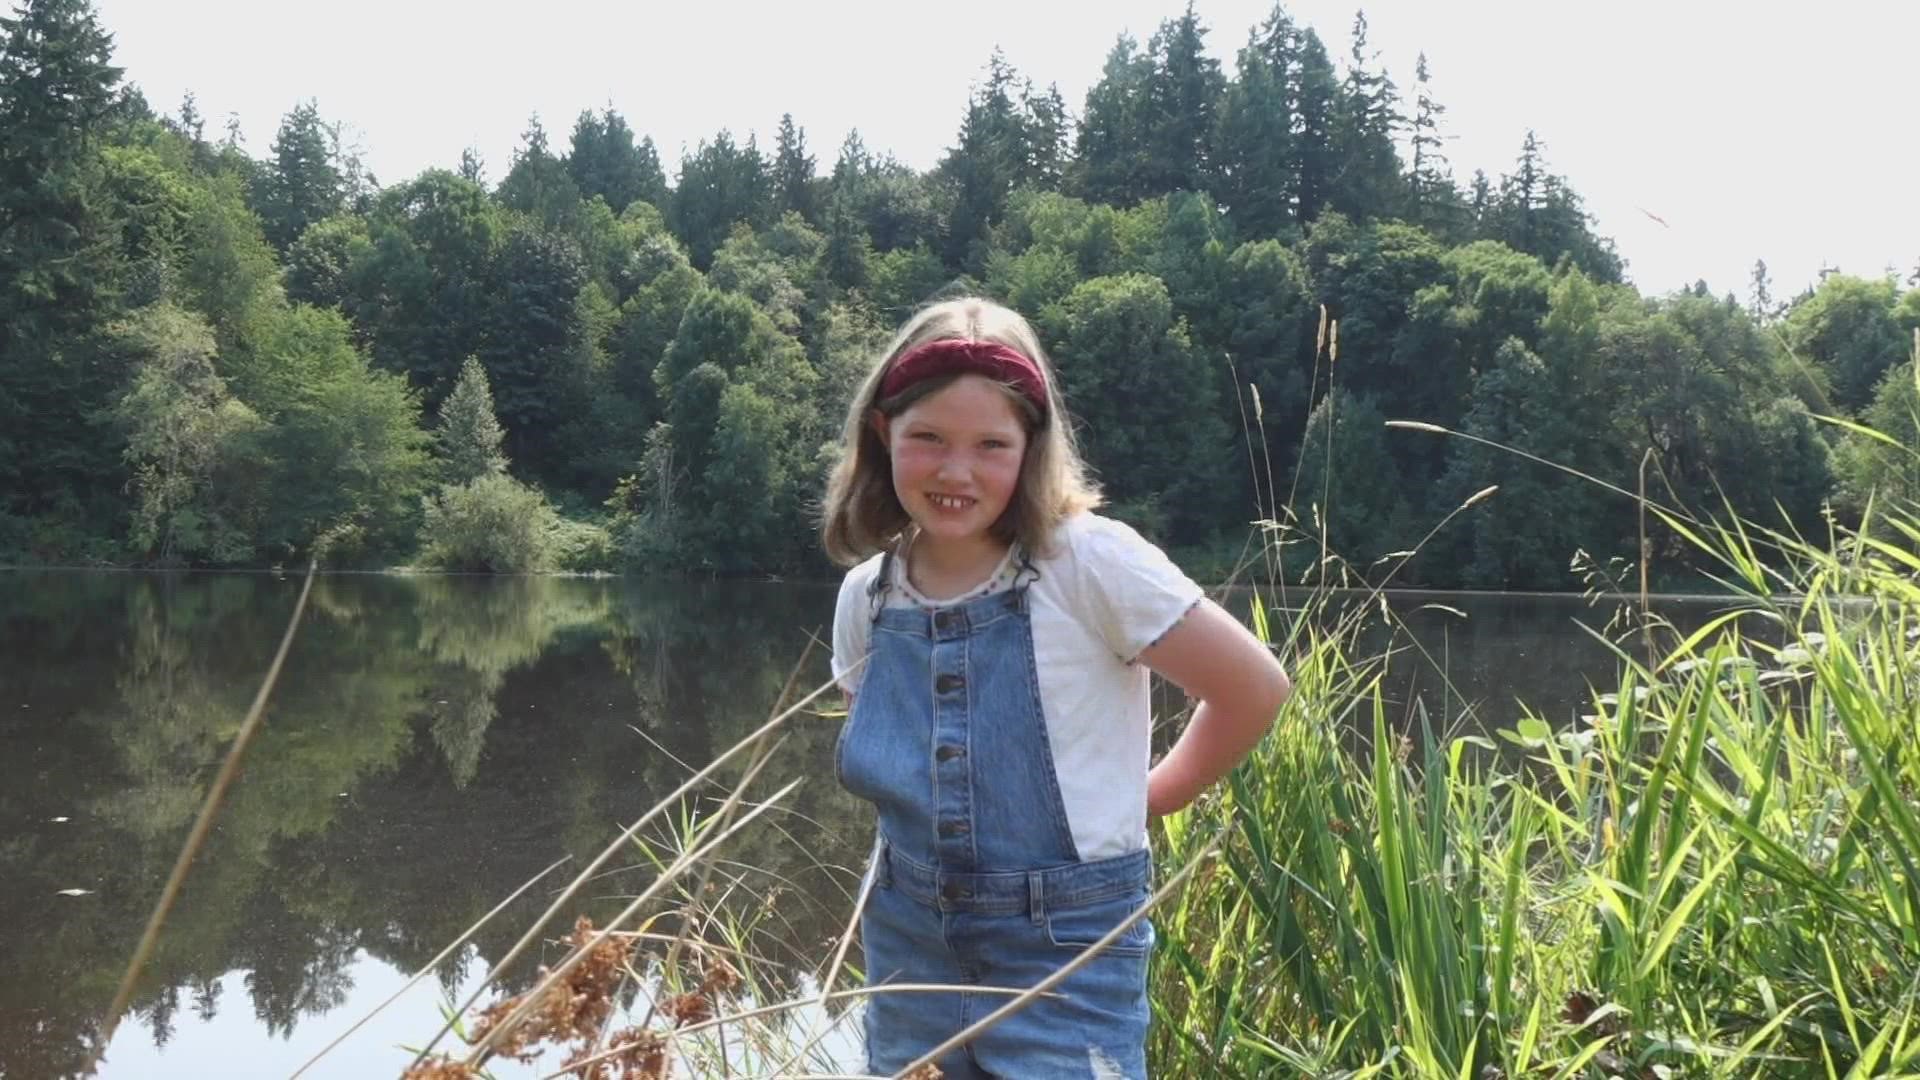 Eight-year-old Maggie Carosino discovered what county officials later confirmed to be "Egeria," a highly invasive aquatic plant.